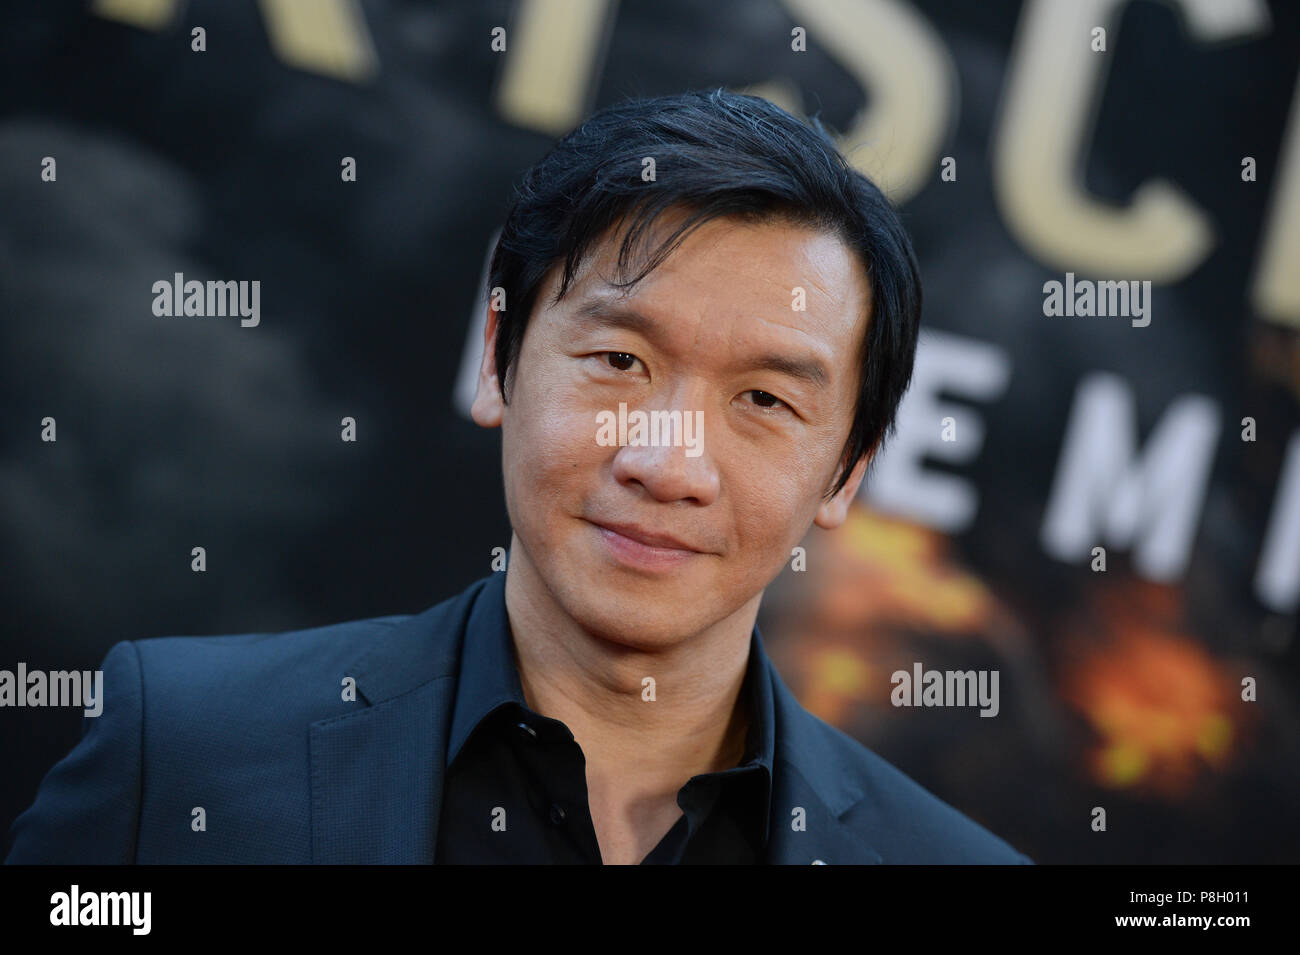 New York, USA. 10th July 2018. Ng Chin Han attends the 'Skyscraper' New York premiere at AMC Loews Lincoln Square on July 10, 2018 in New York City. Credit: Erik Pendzich/Alamy Live News Stock Photo